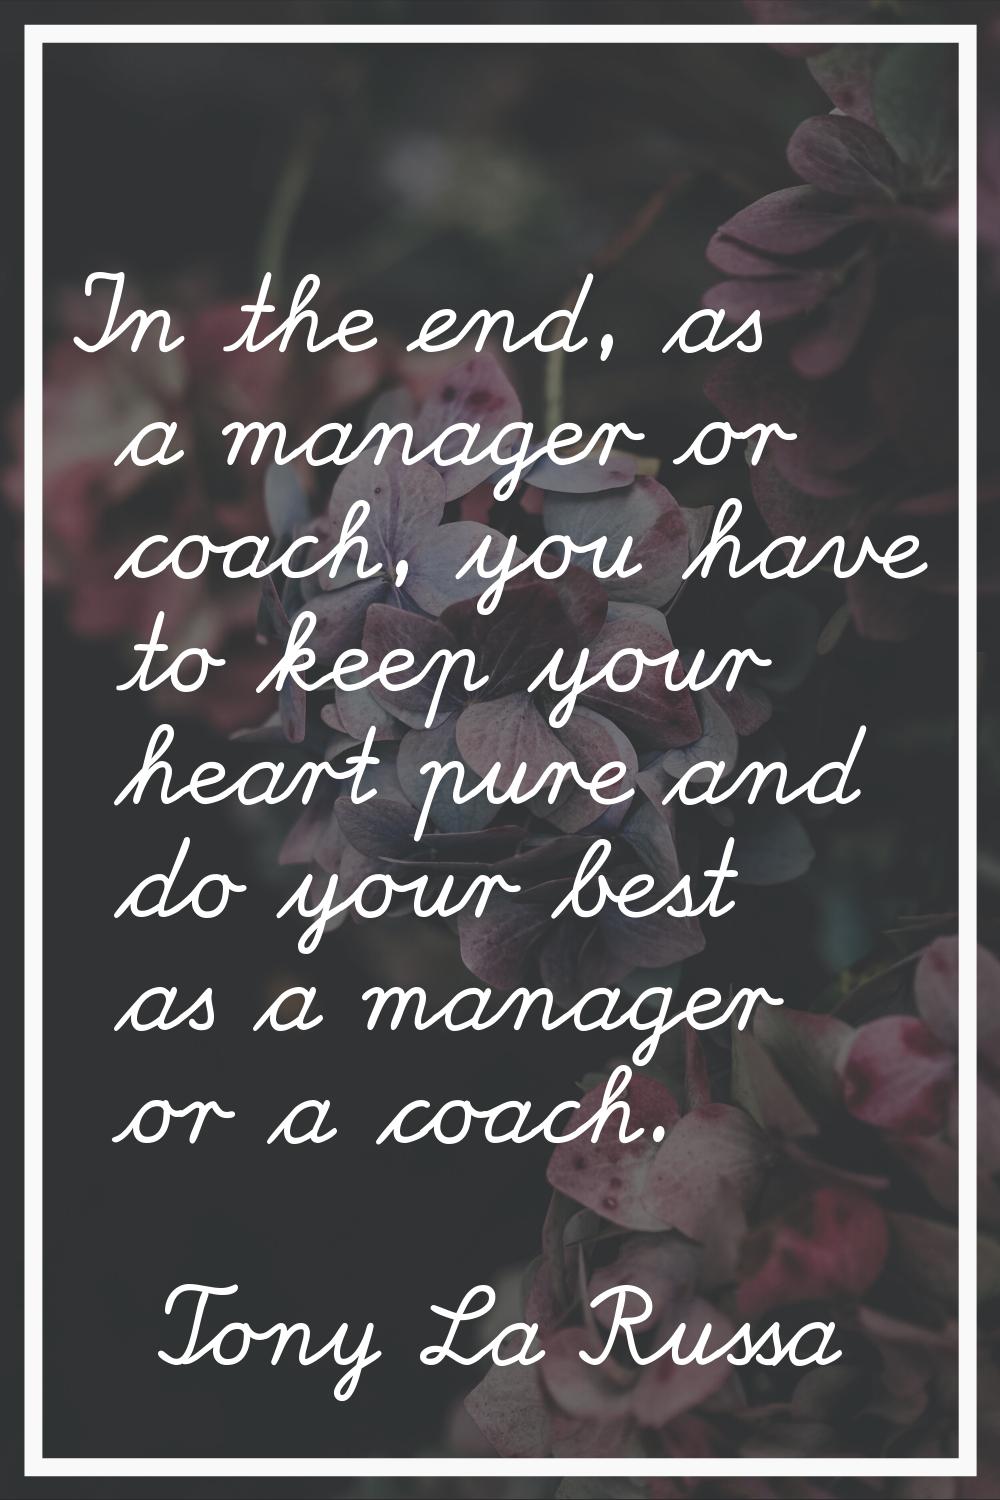 In the end, as a manager or coach, you have to keep your heart pure and do your best as a manager o